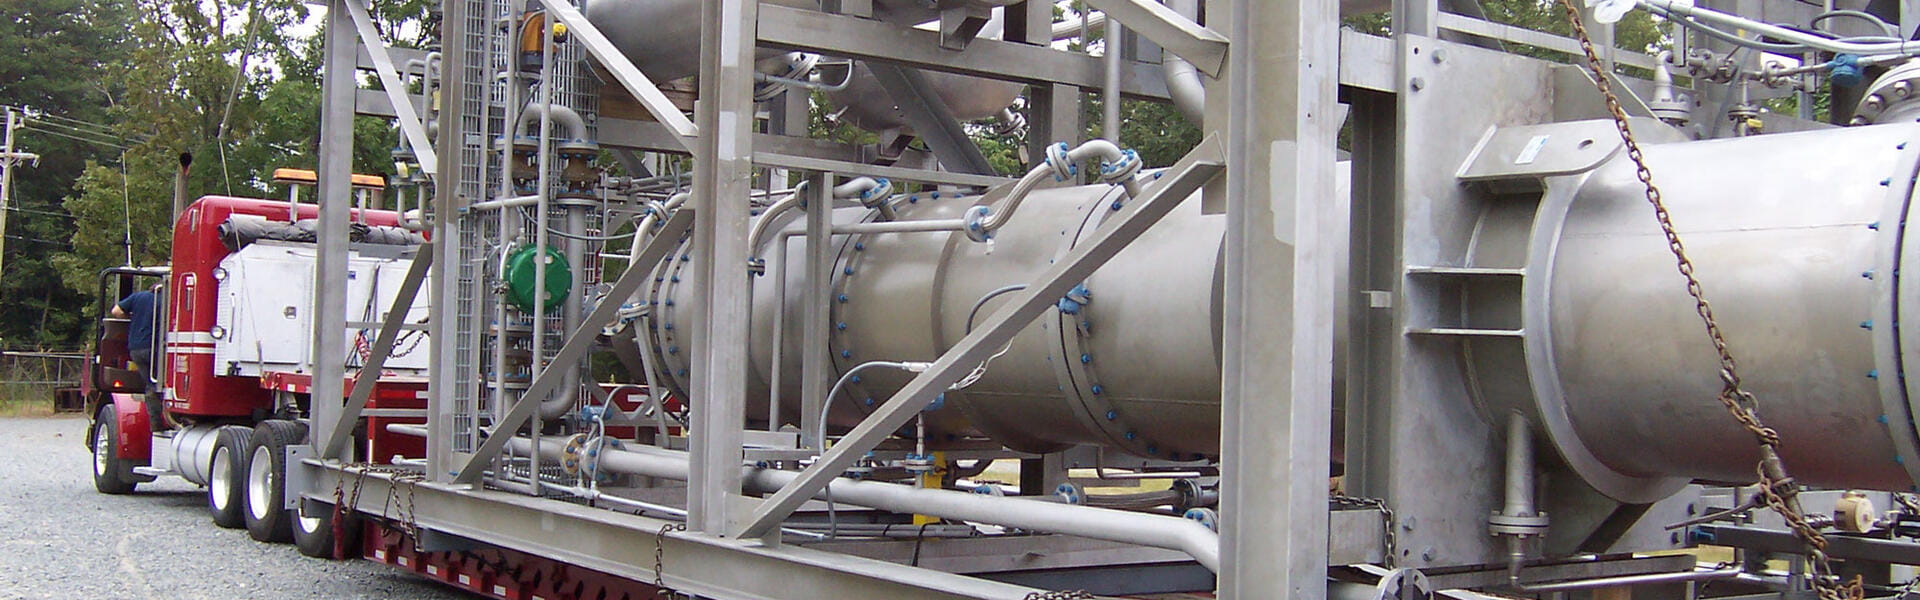 Lecithin and Indirect Contact Dryers